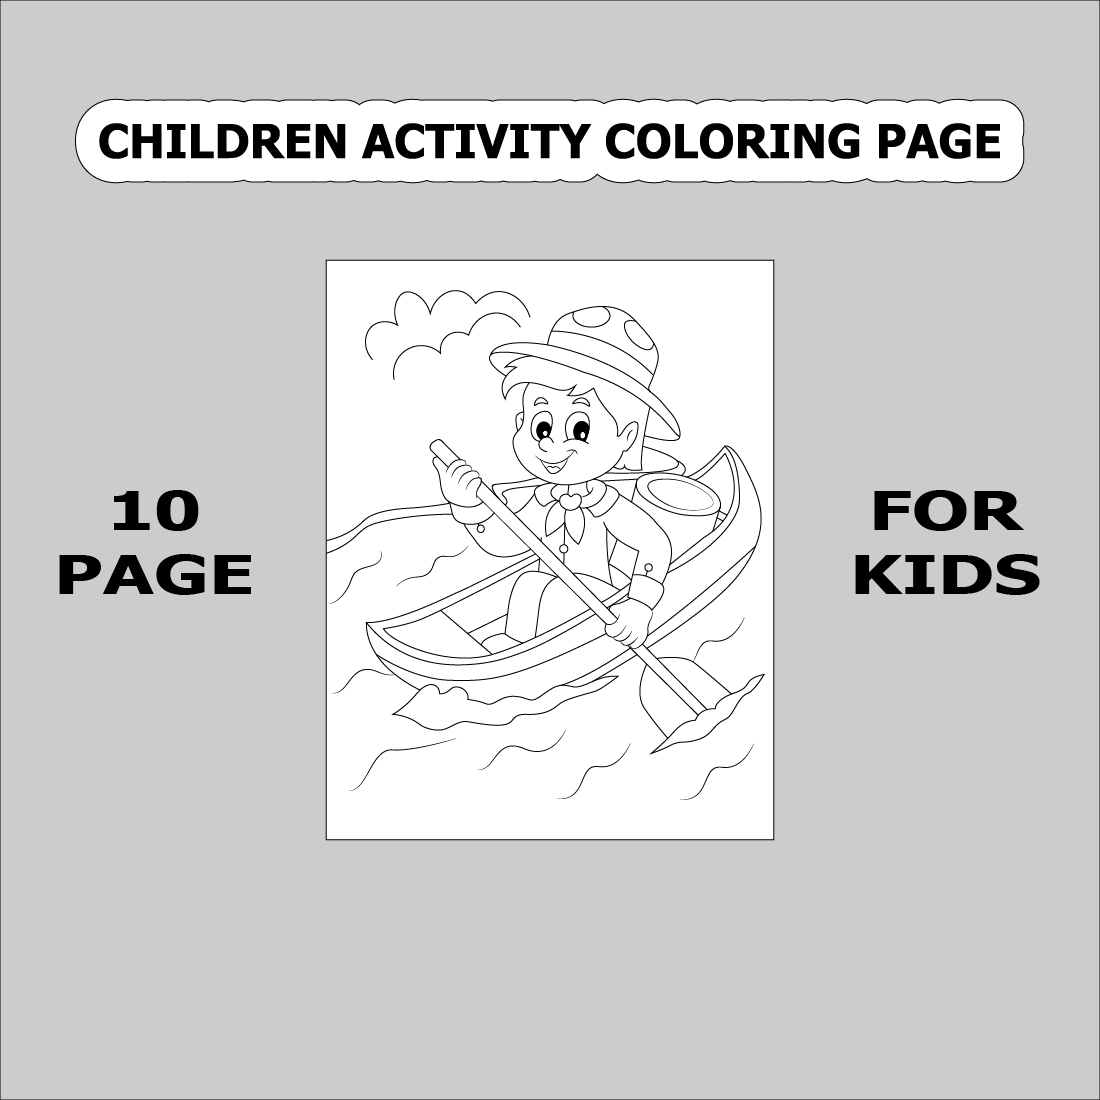 Activity Coloring Book for Kids cover image.